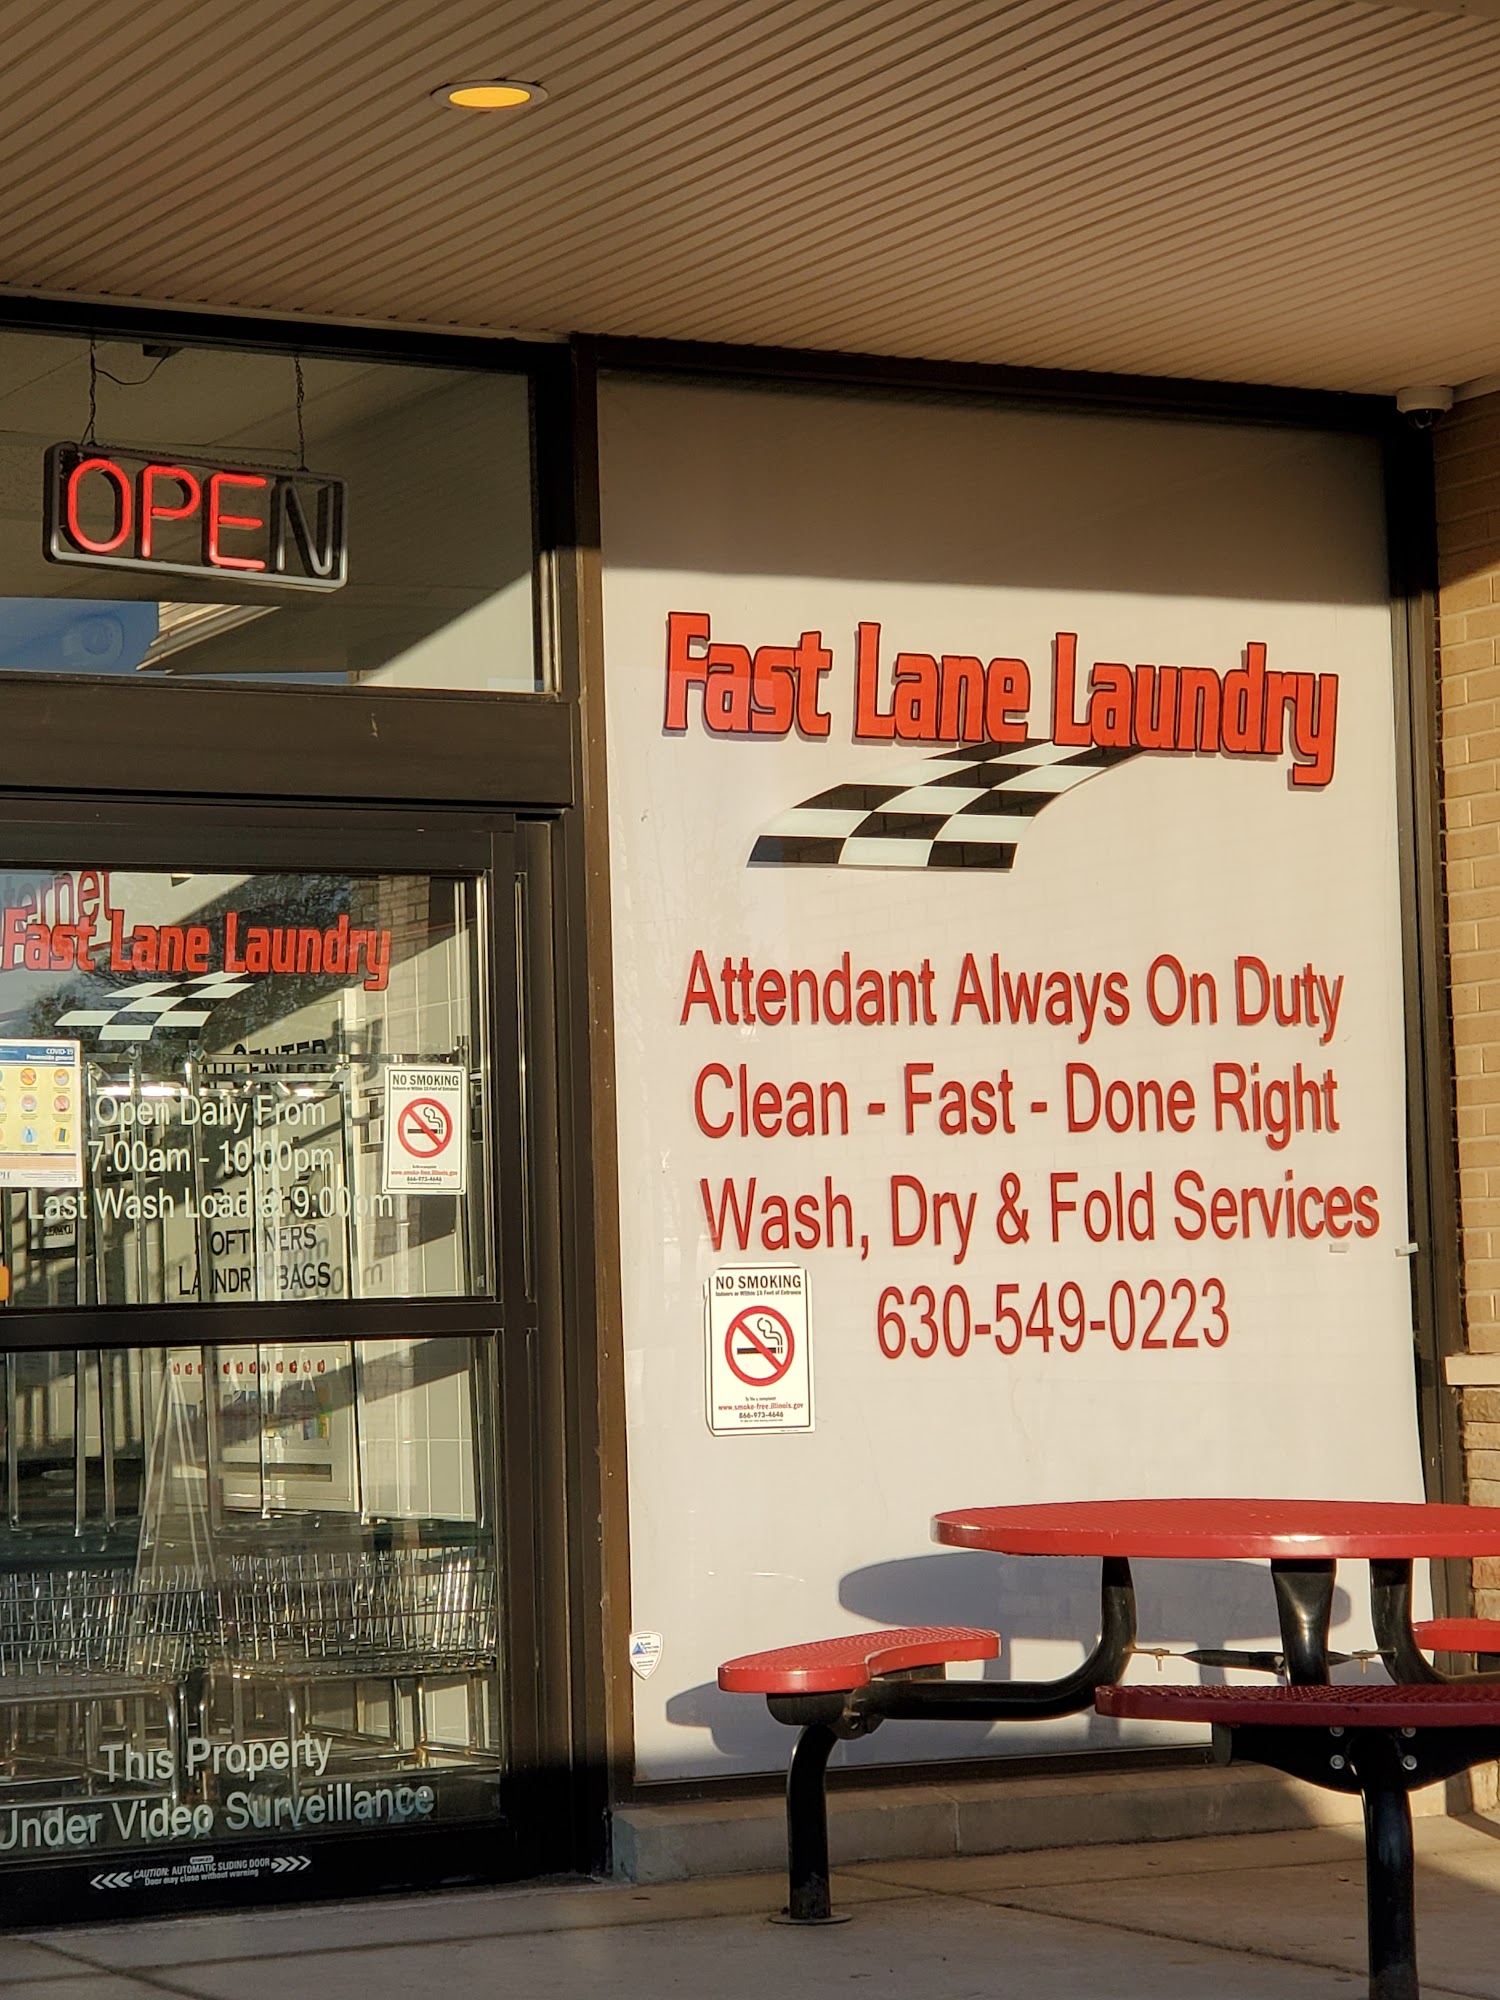 Fast Lane Laundry: drop off, pick up & delivery laundry